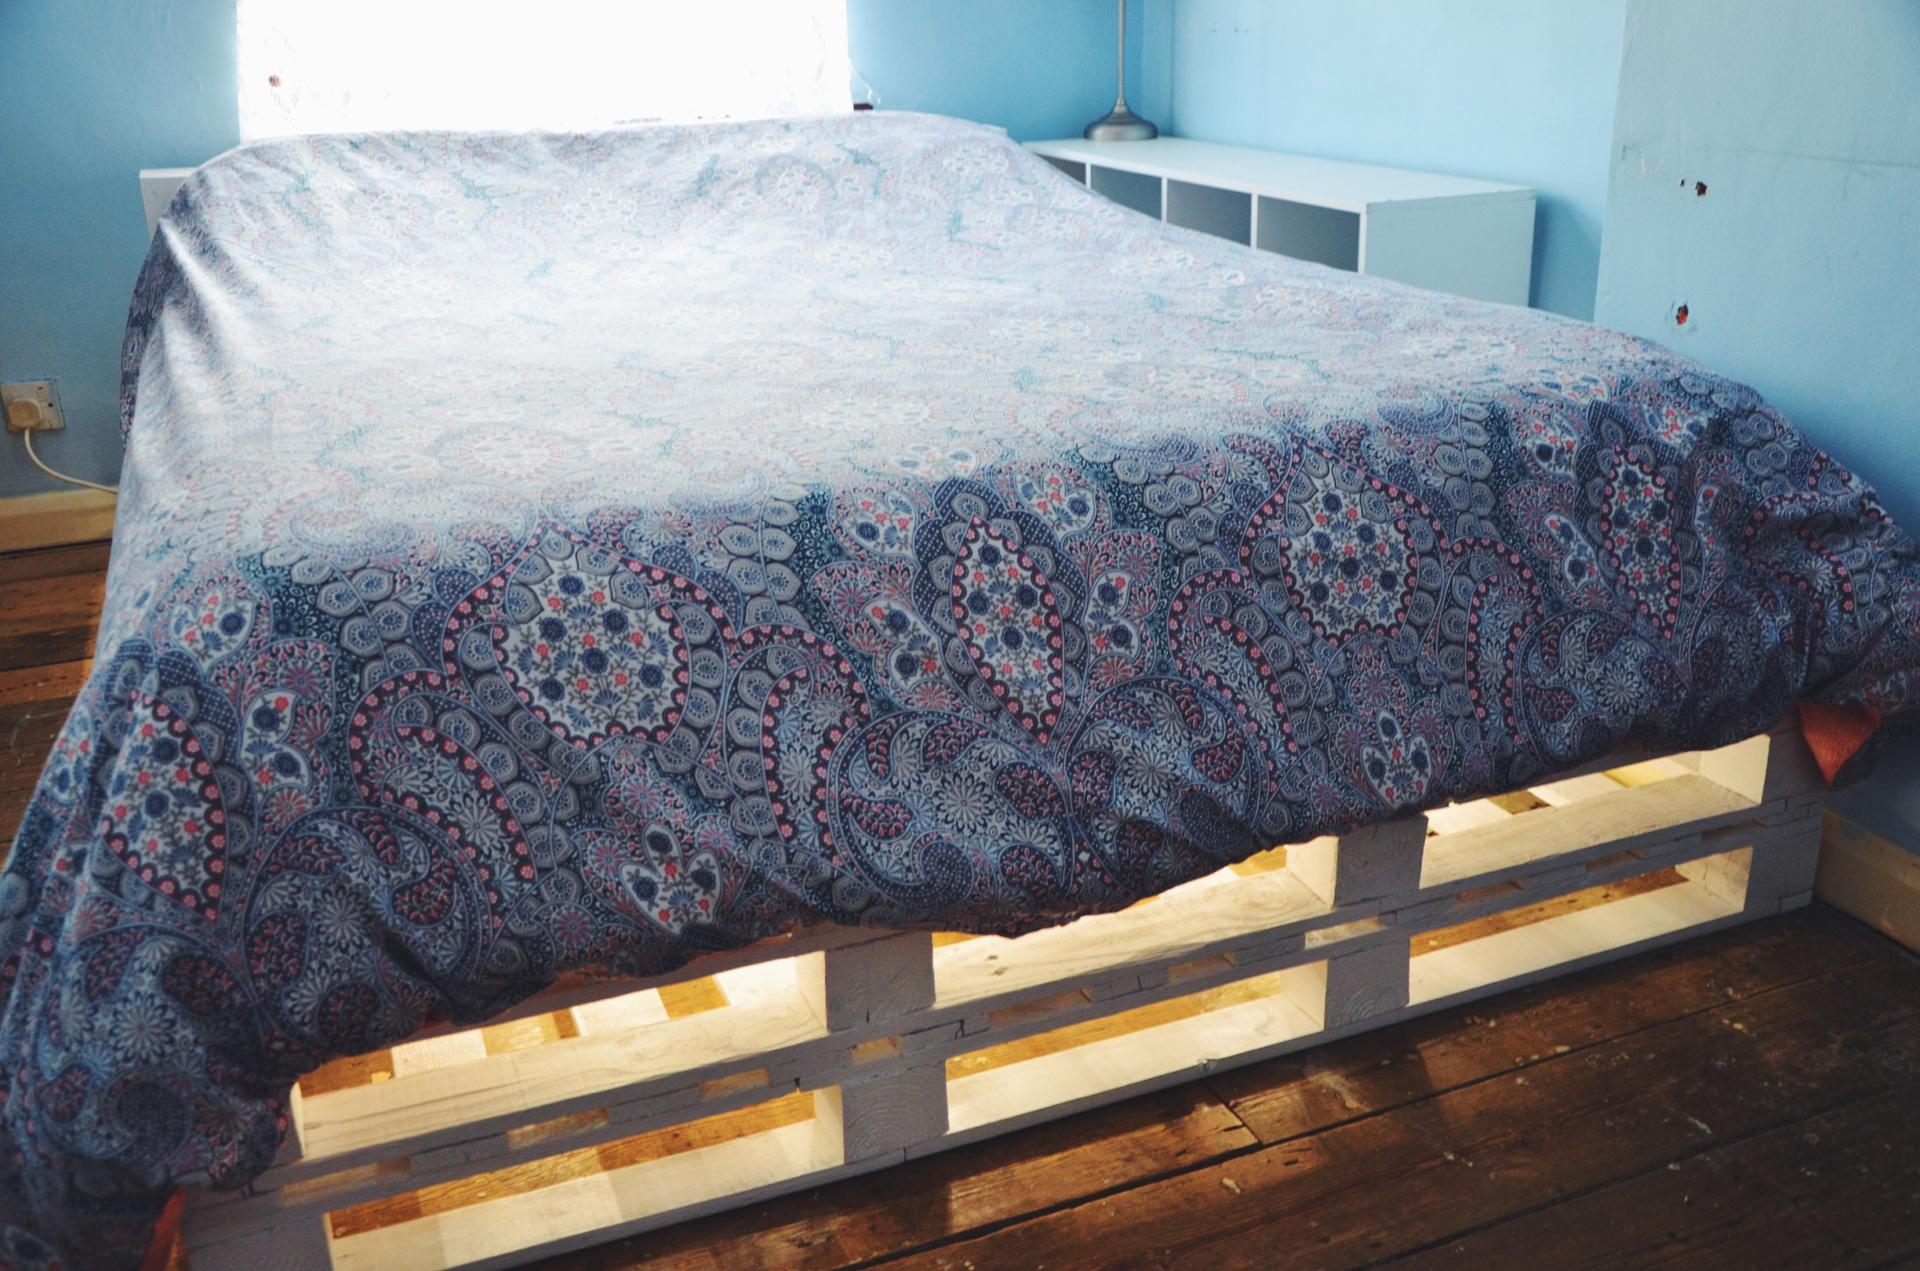 How to make a palette bed